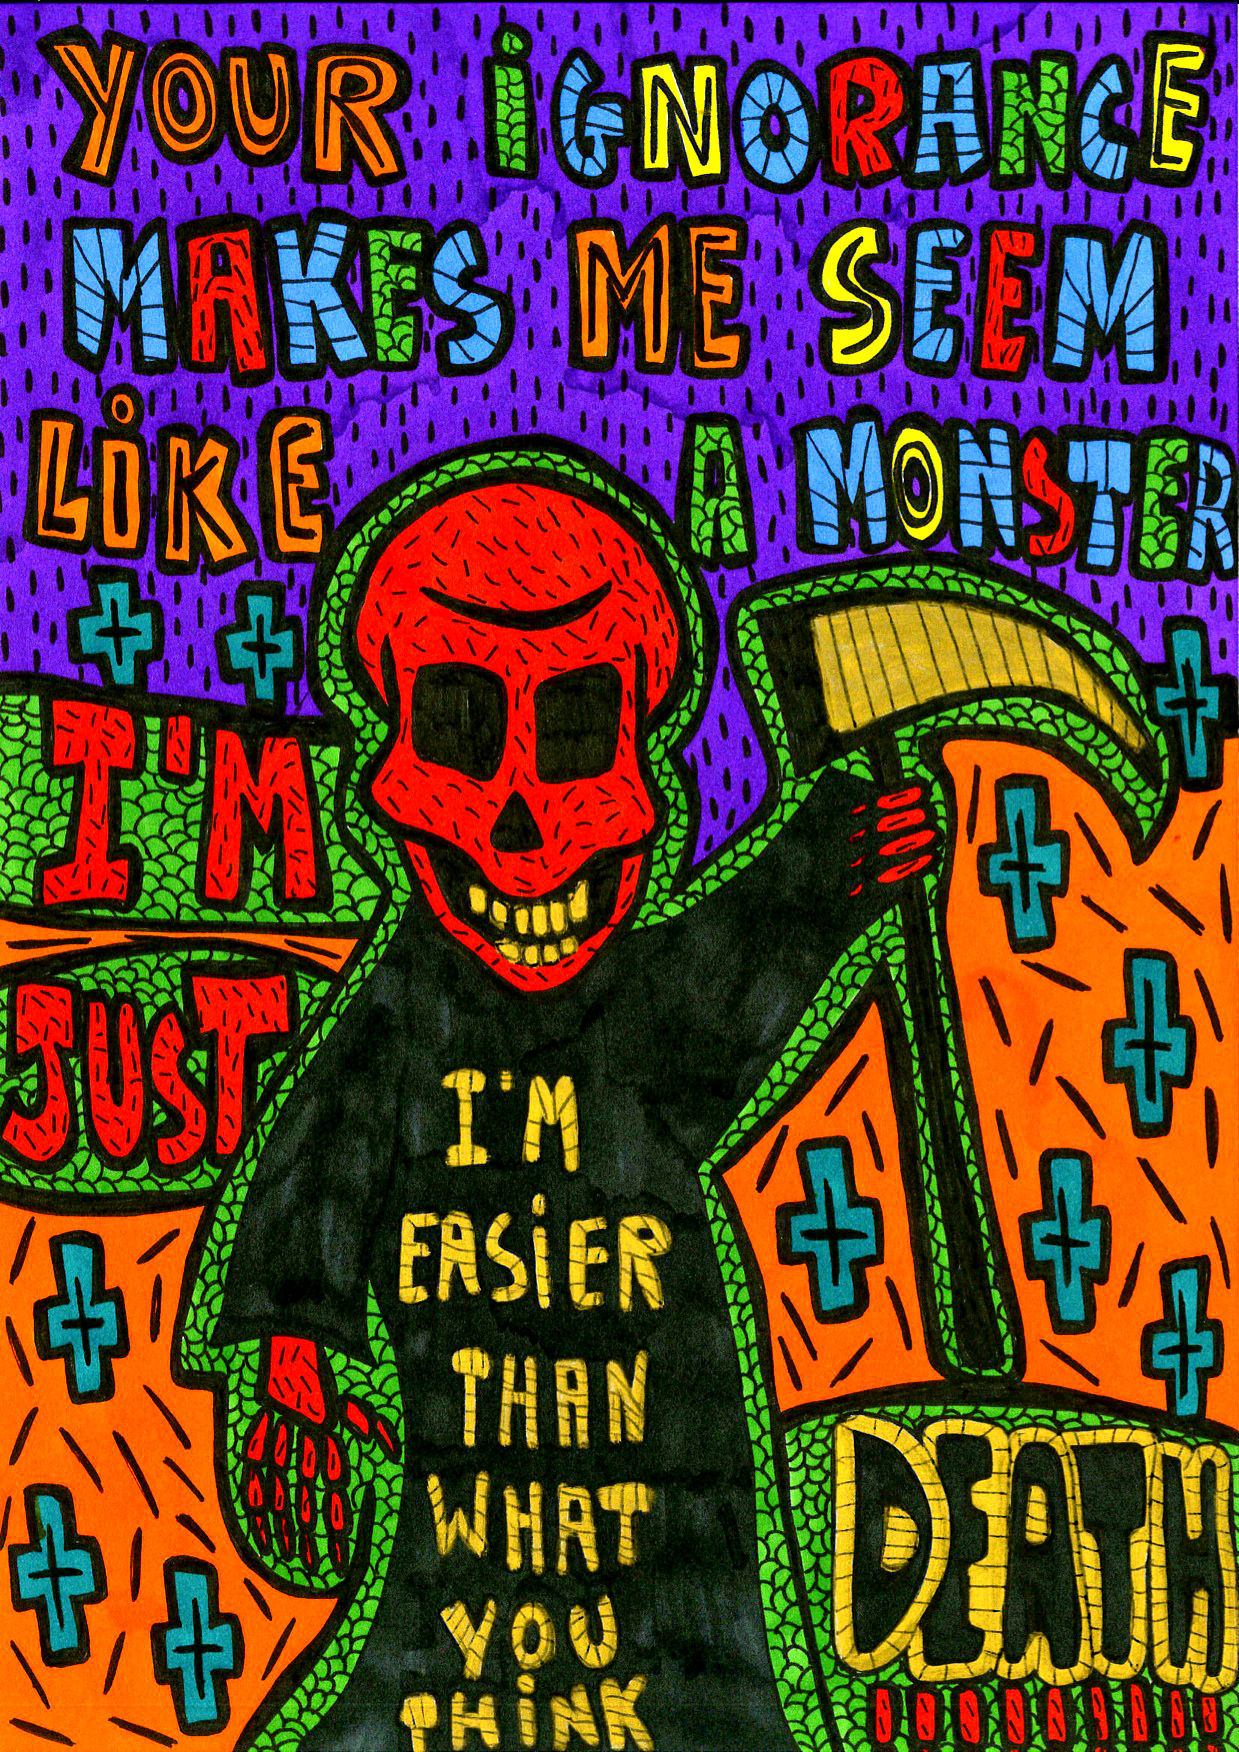    “I am just Death!!!” , 2013   Marker on paper, 21 x 29.7 cm 